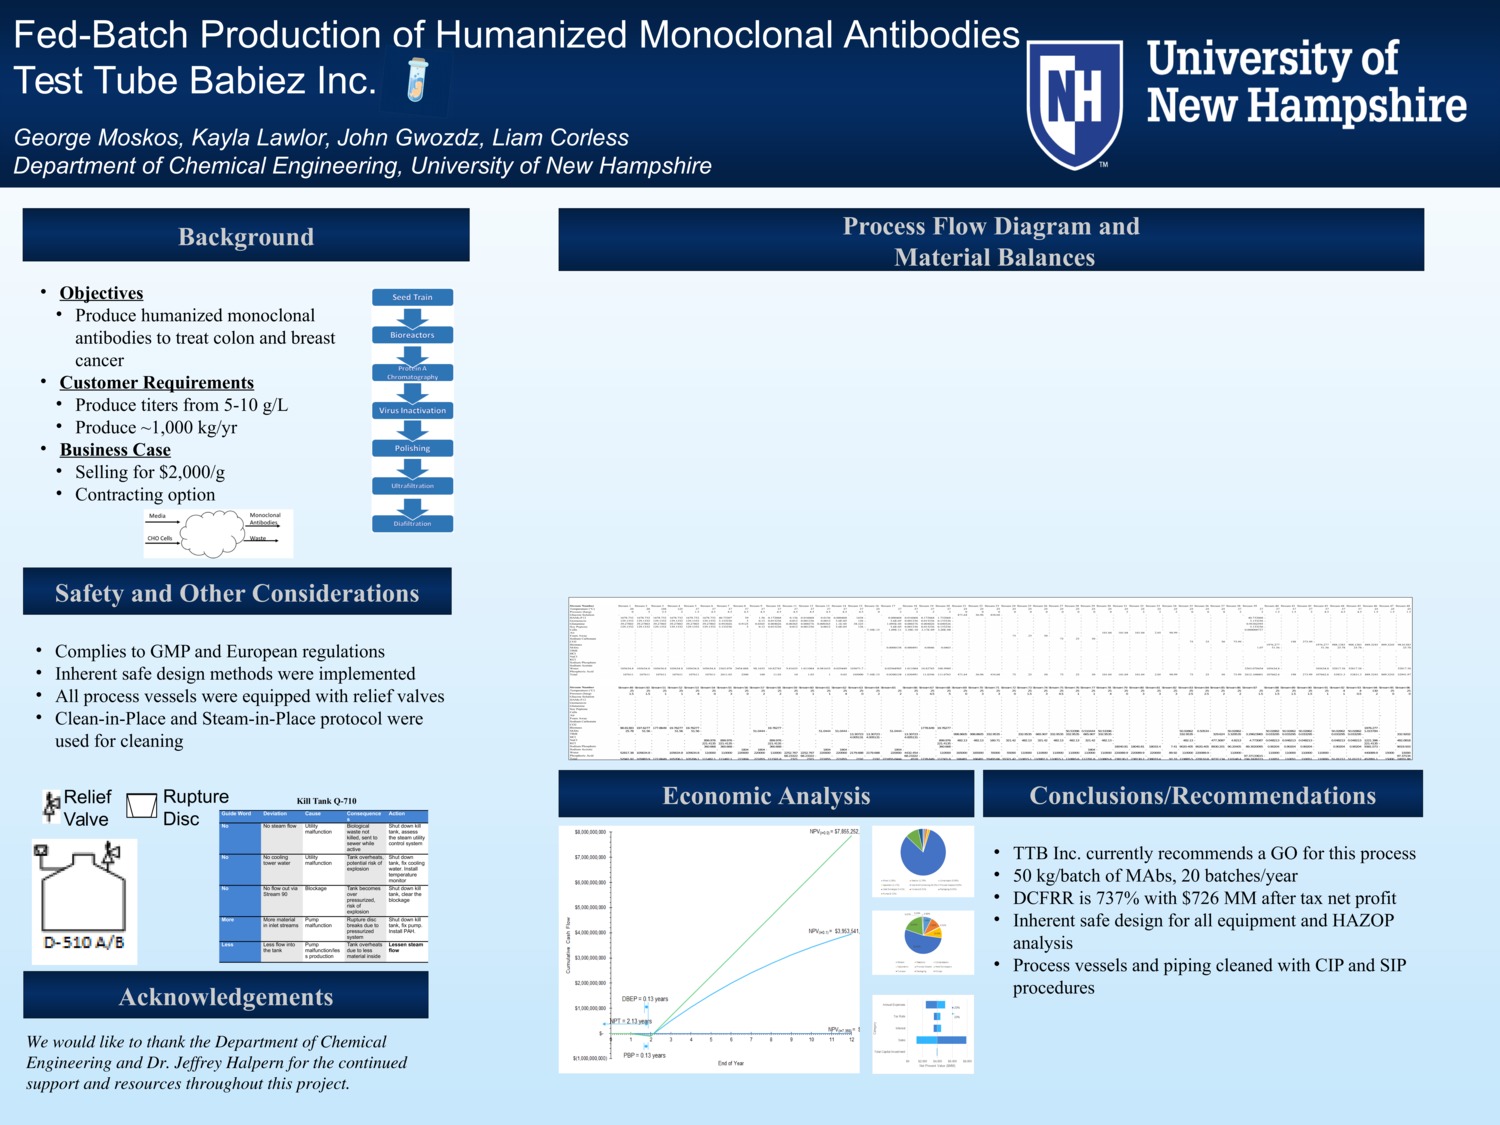 Fed-Batch Production Of Humanized Monoclonal Antibodies by kl1007